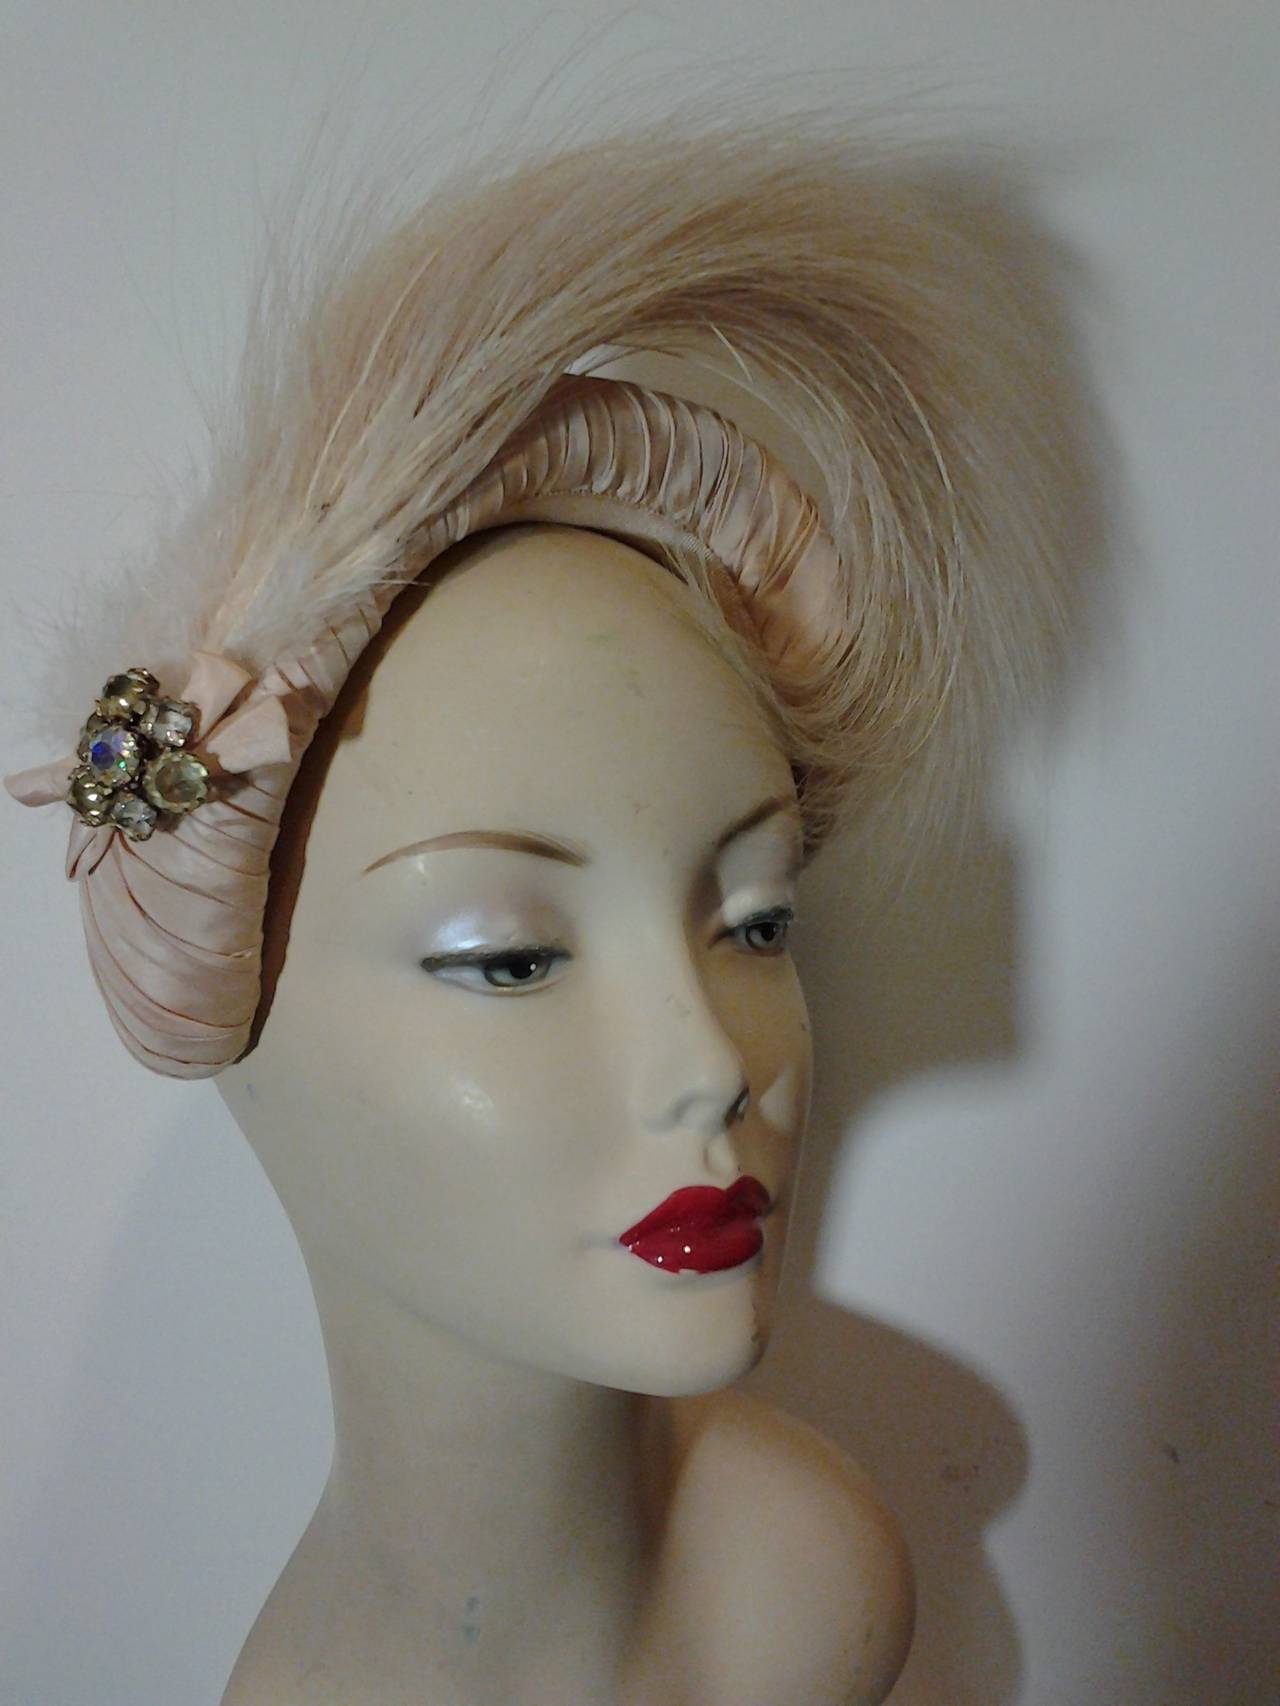 A superb 1950s Simone Geist egret feather, ballet-inspired headband hat. Made in France of pale pink silk satin and egret feathers.  Reminiscent of a Swan Lake headpiece.